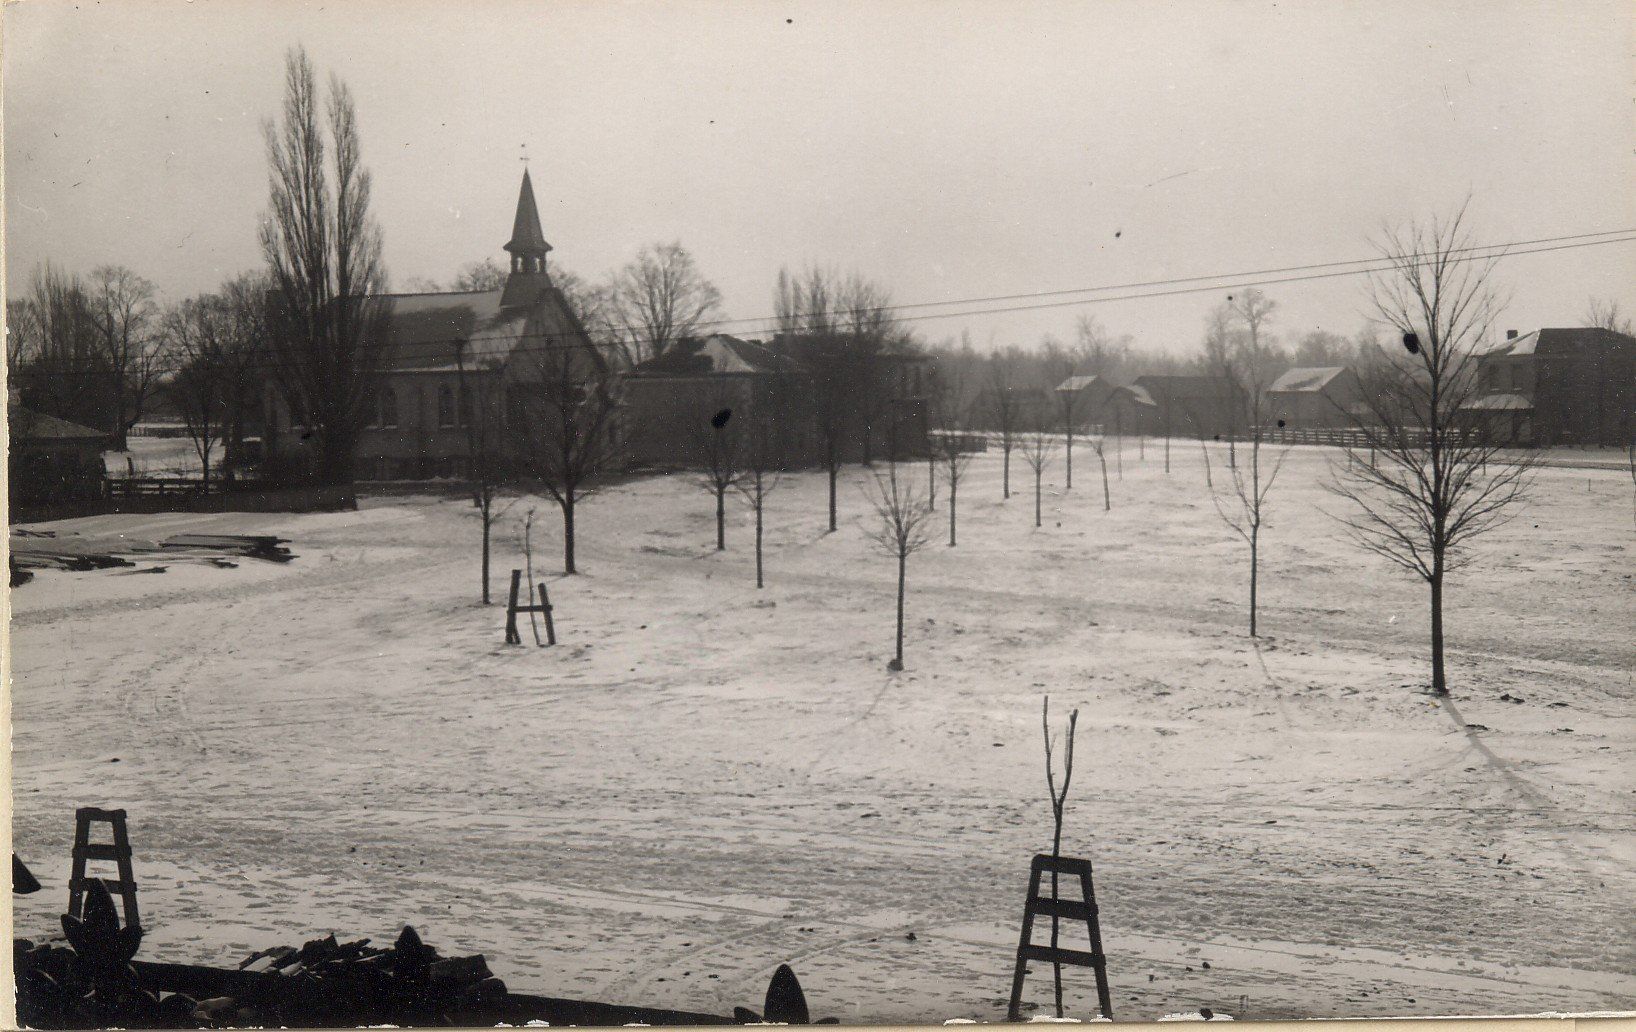 St. Andrew's Presbyterian Church and Clan Gregor Square, circa 1900.